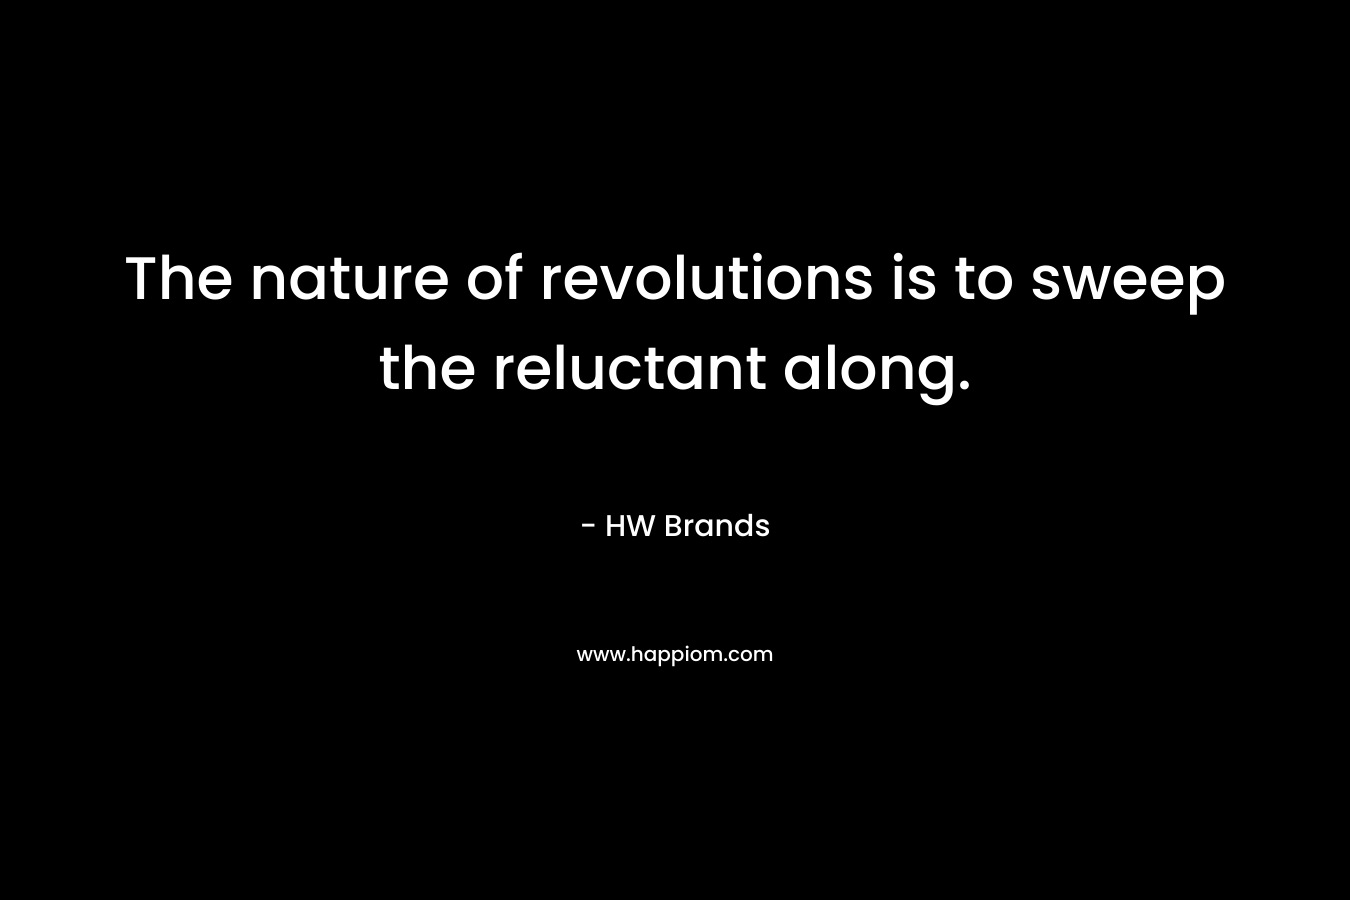 The nature of revolutions is to sweep the reluctant along. – HW Brands